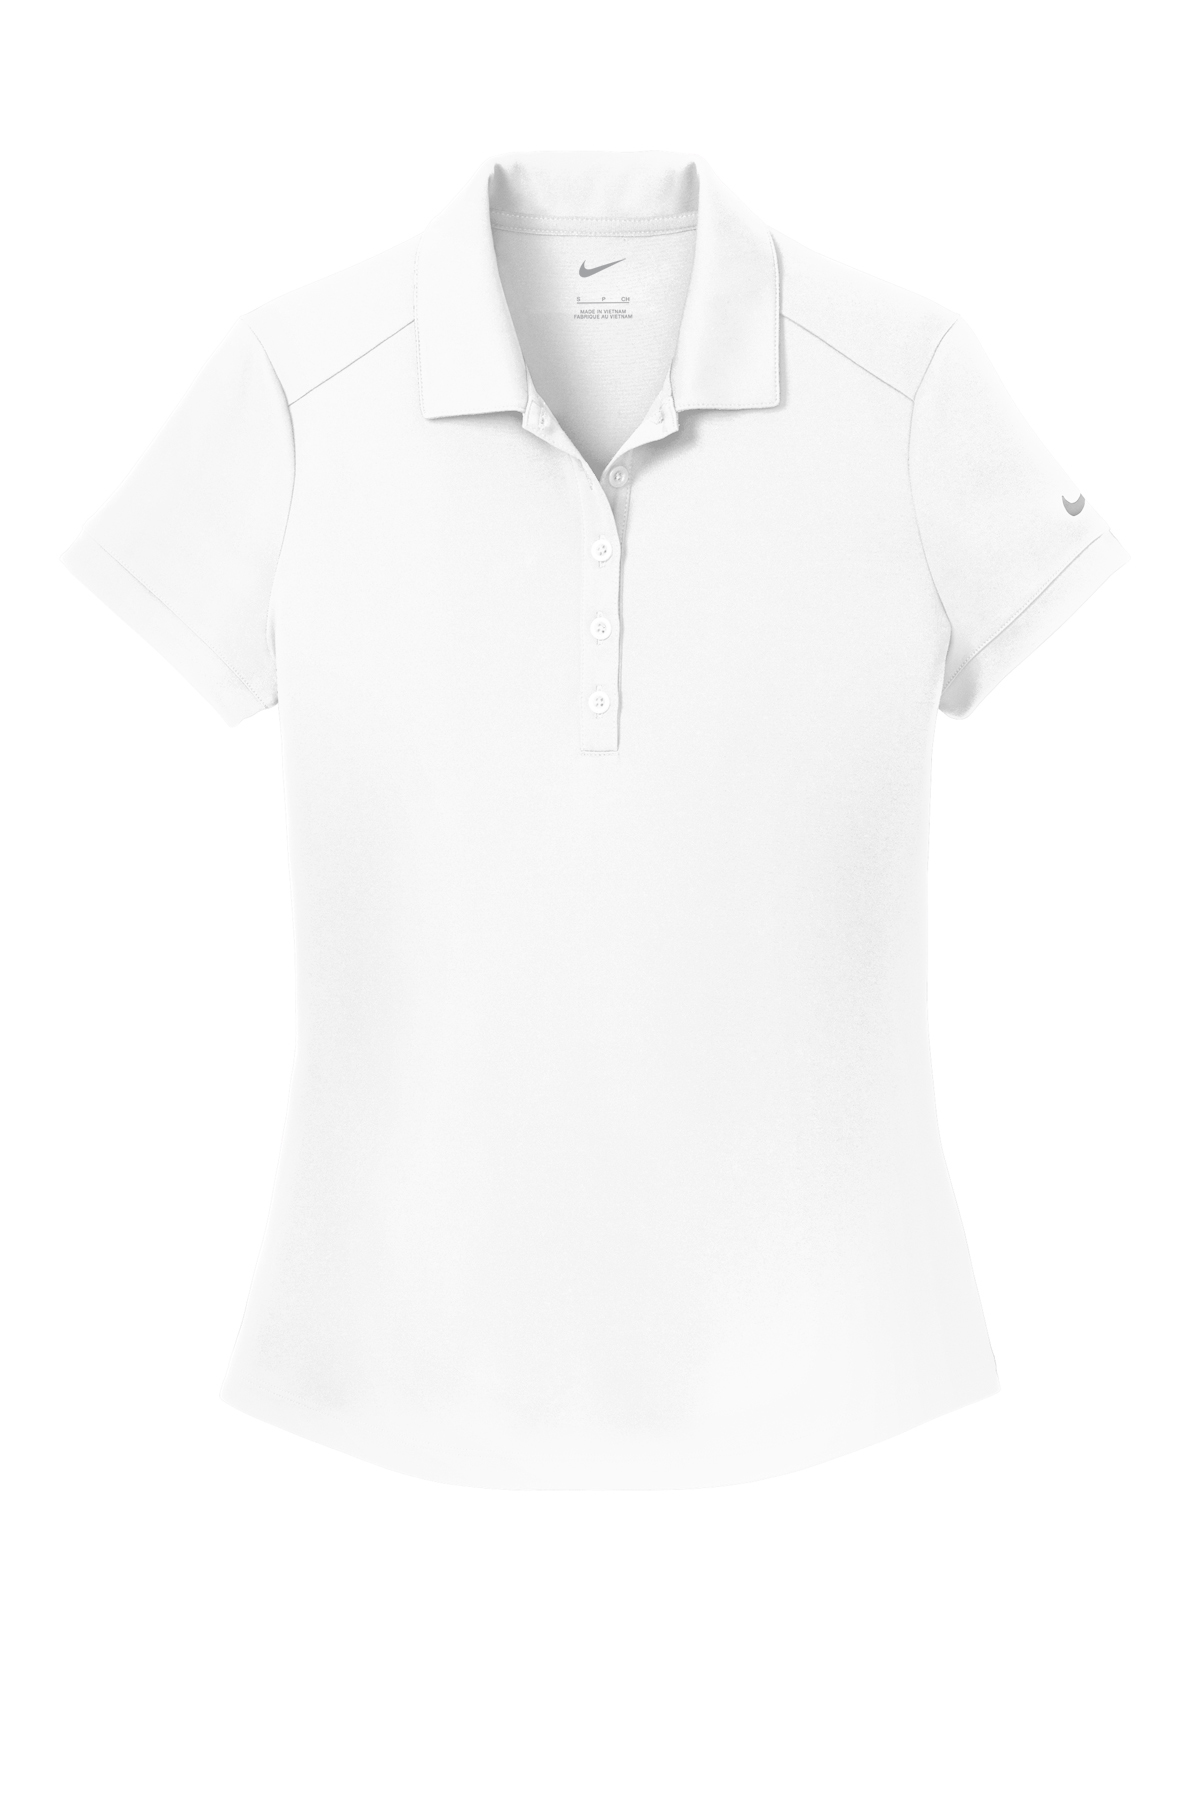 Nike Ladies Dri-FIT Players Modern Fit Polo | Product | Company Casuals